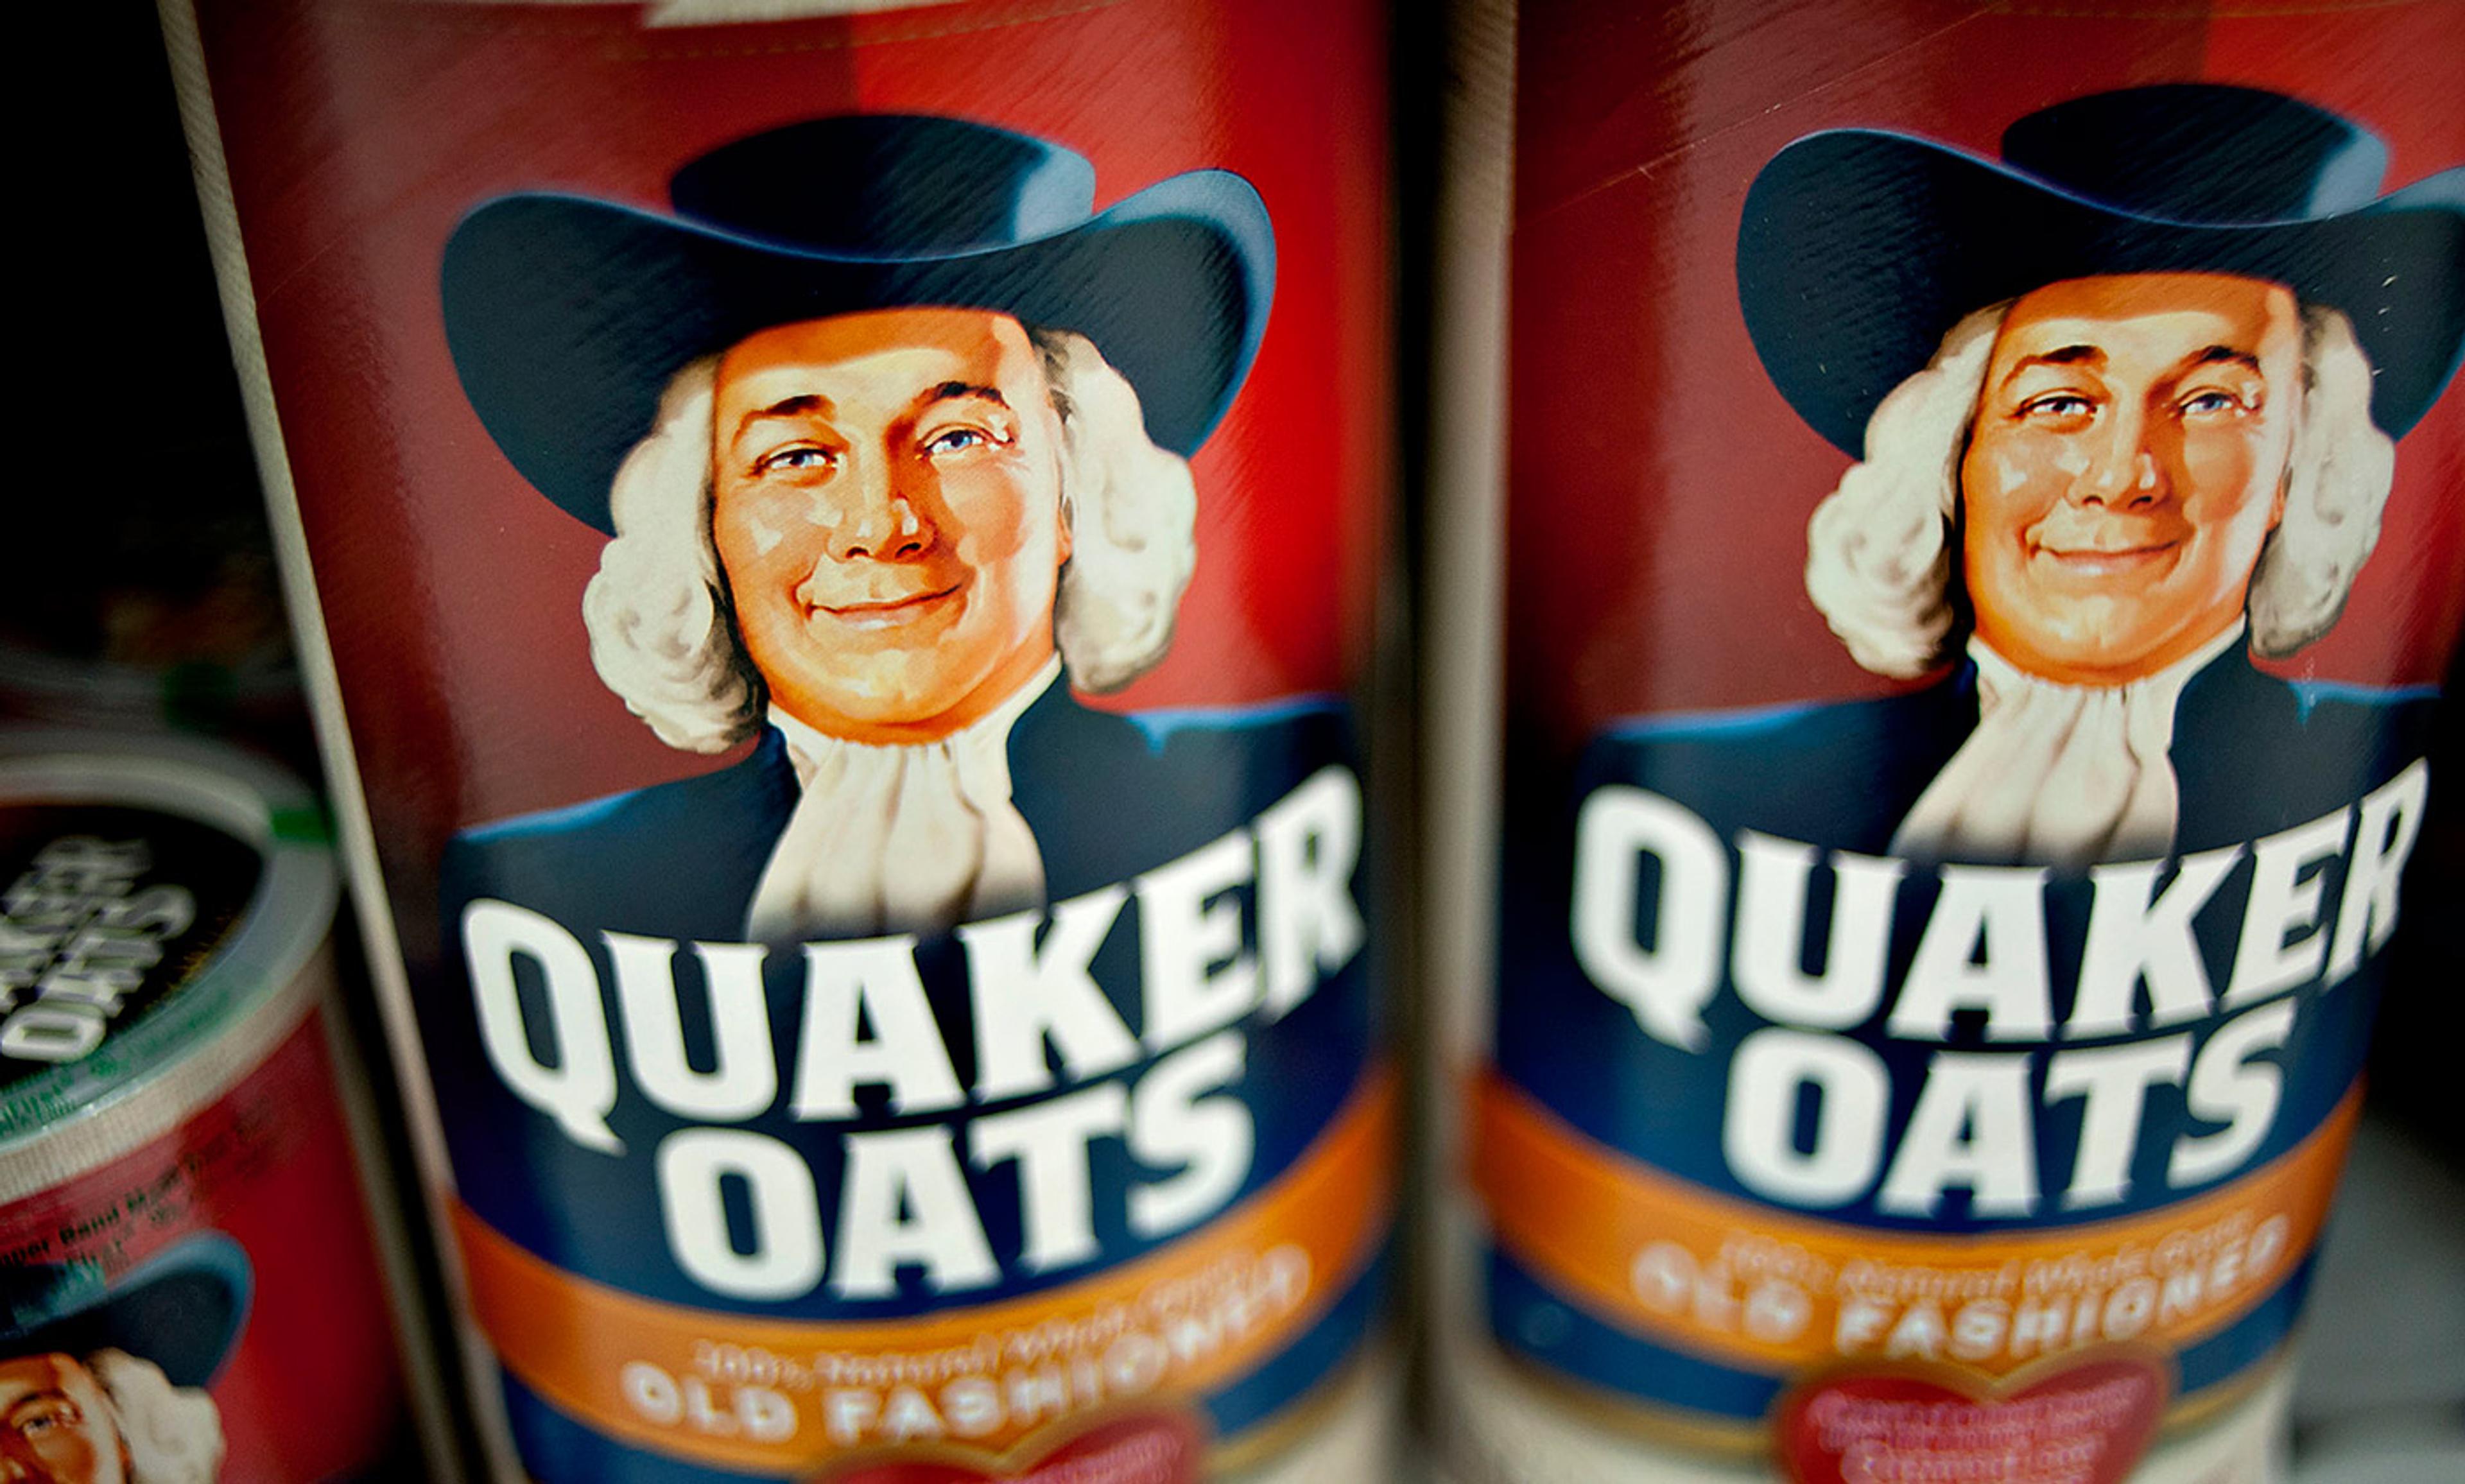 He's not the guy on Quaker Oats: he's much more interesting